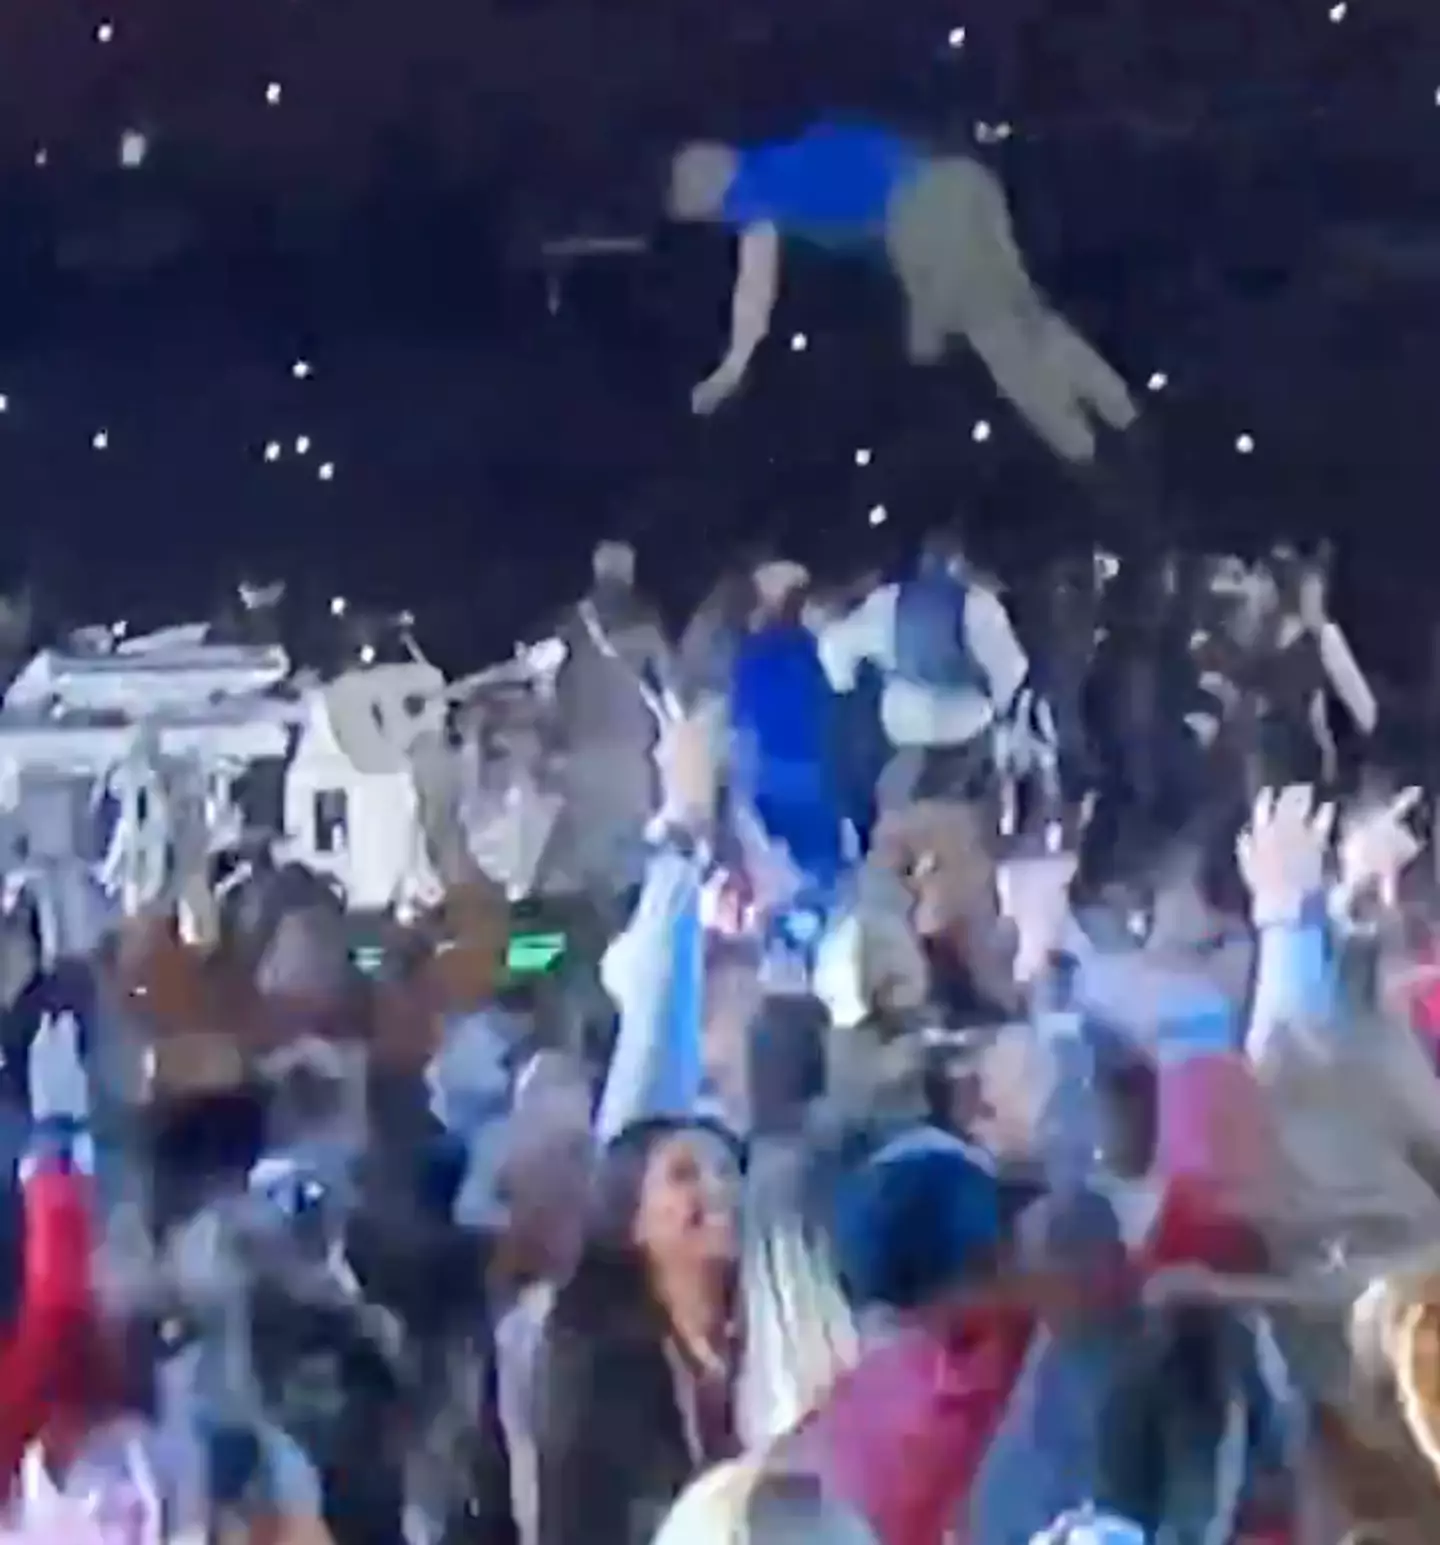 An Usher fan ended up airborne during Lil Jon's song 'Turn Down For What'.